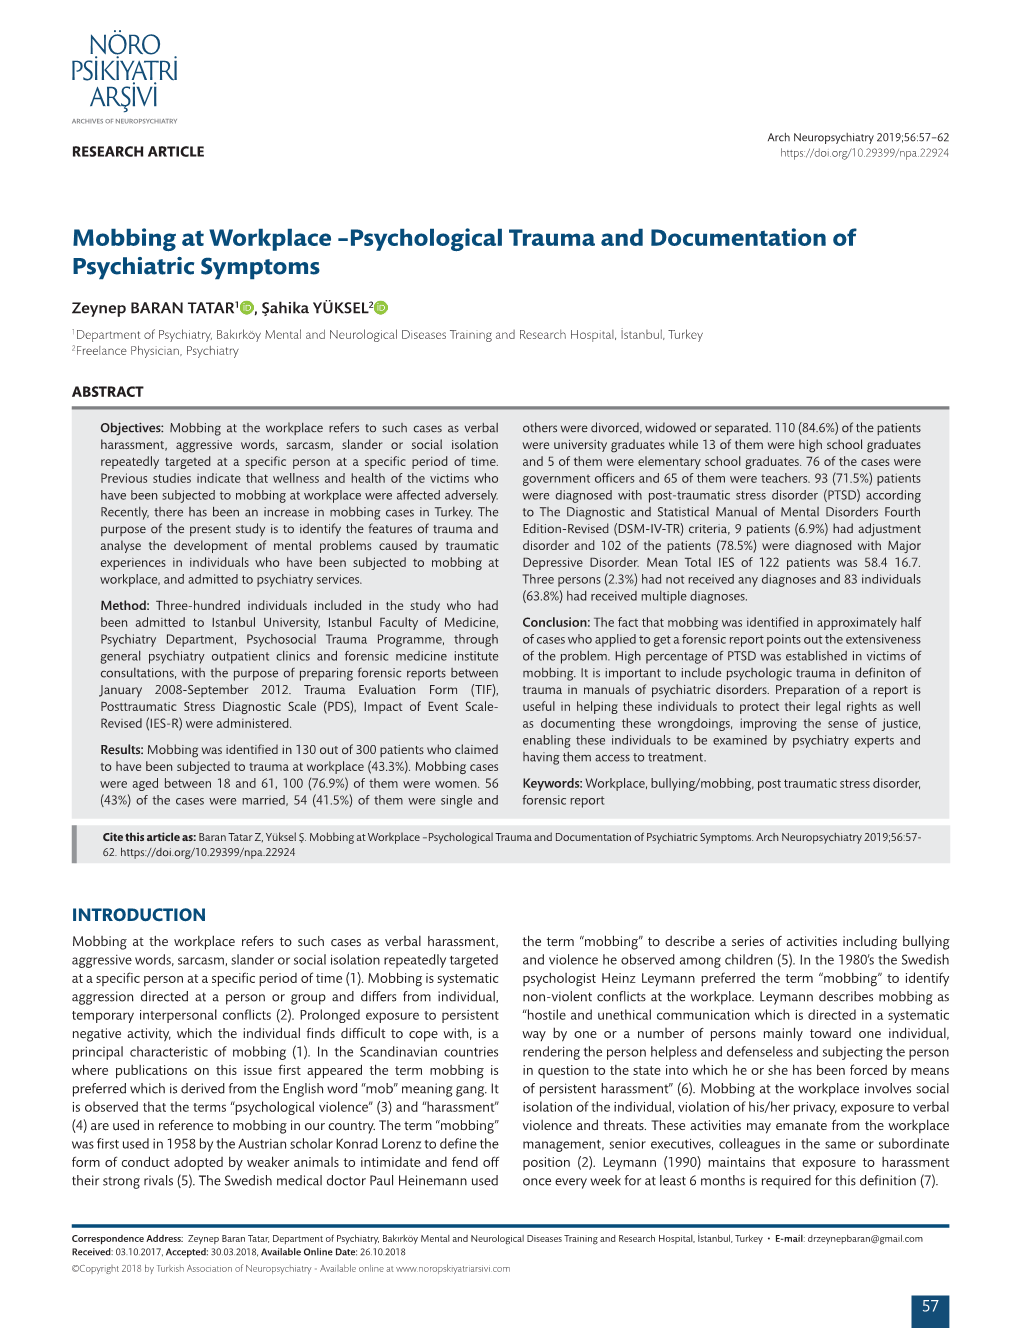 Mobbing at Workplace –Psychological Trauma and Documentation of Psychiatric Symptoms